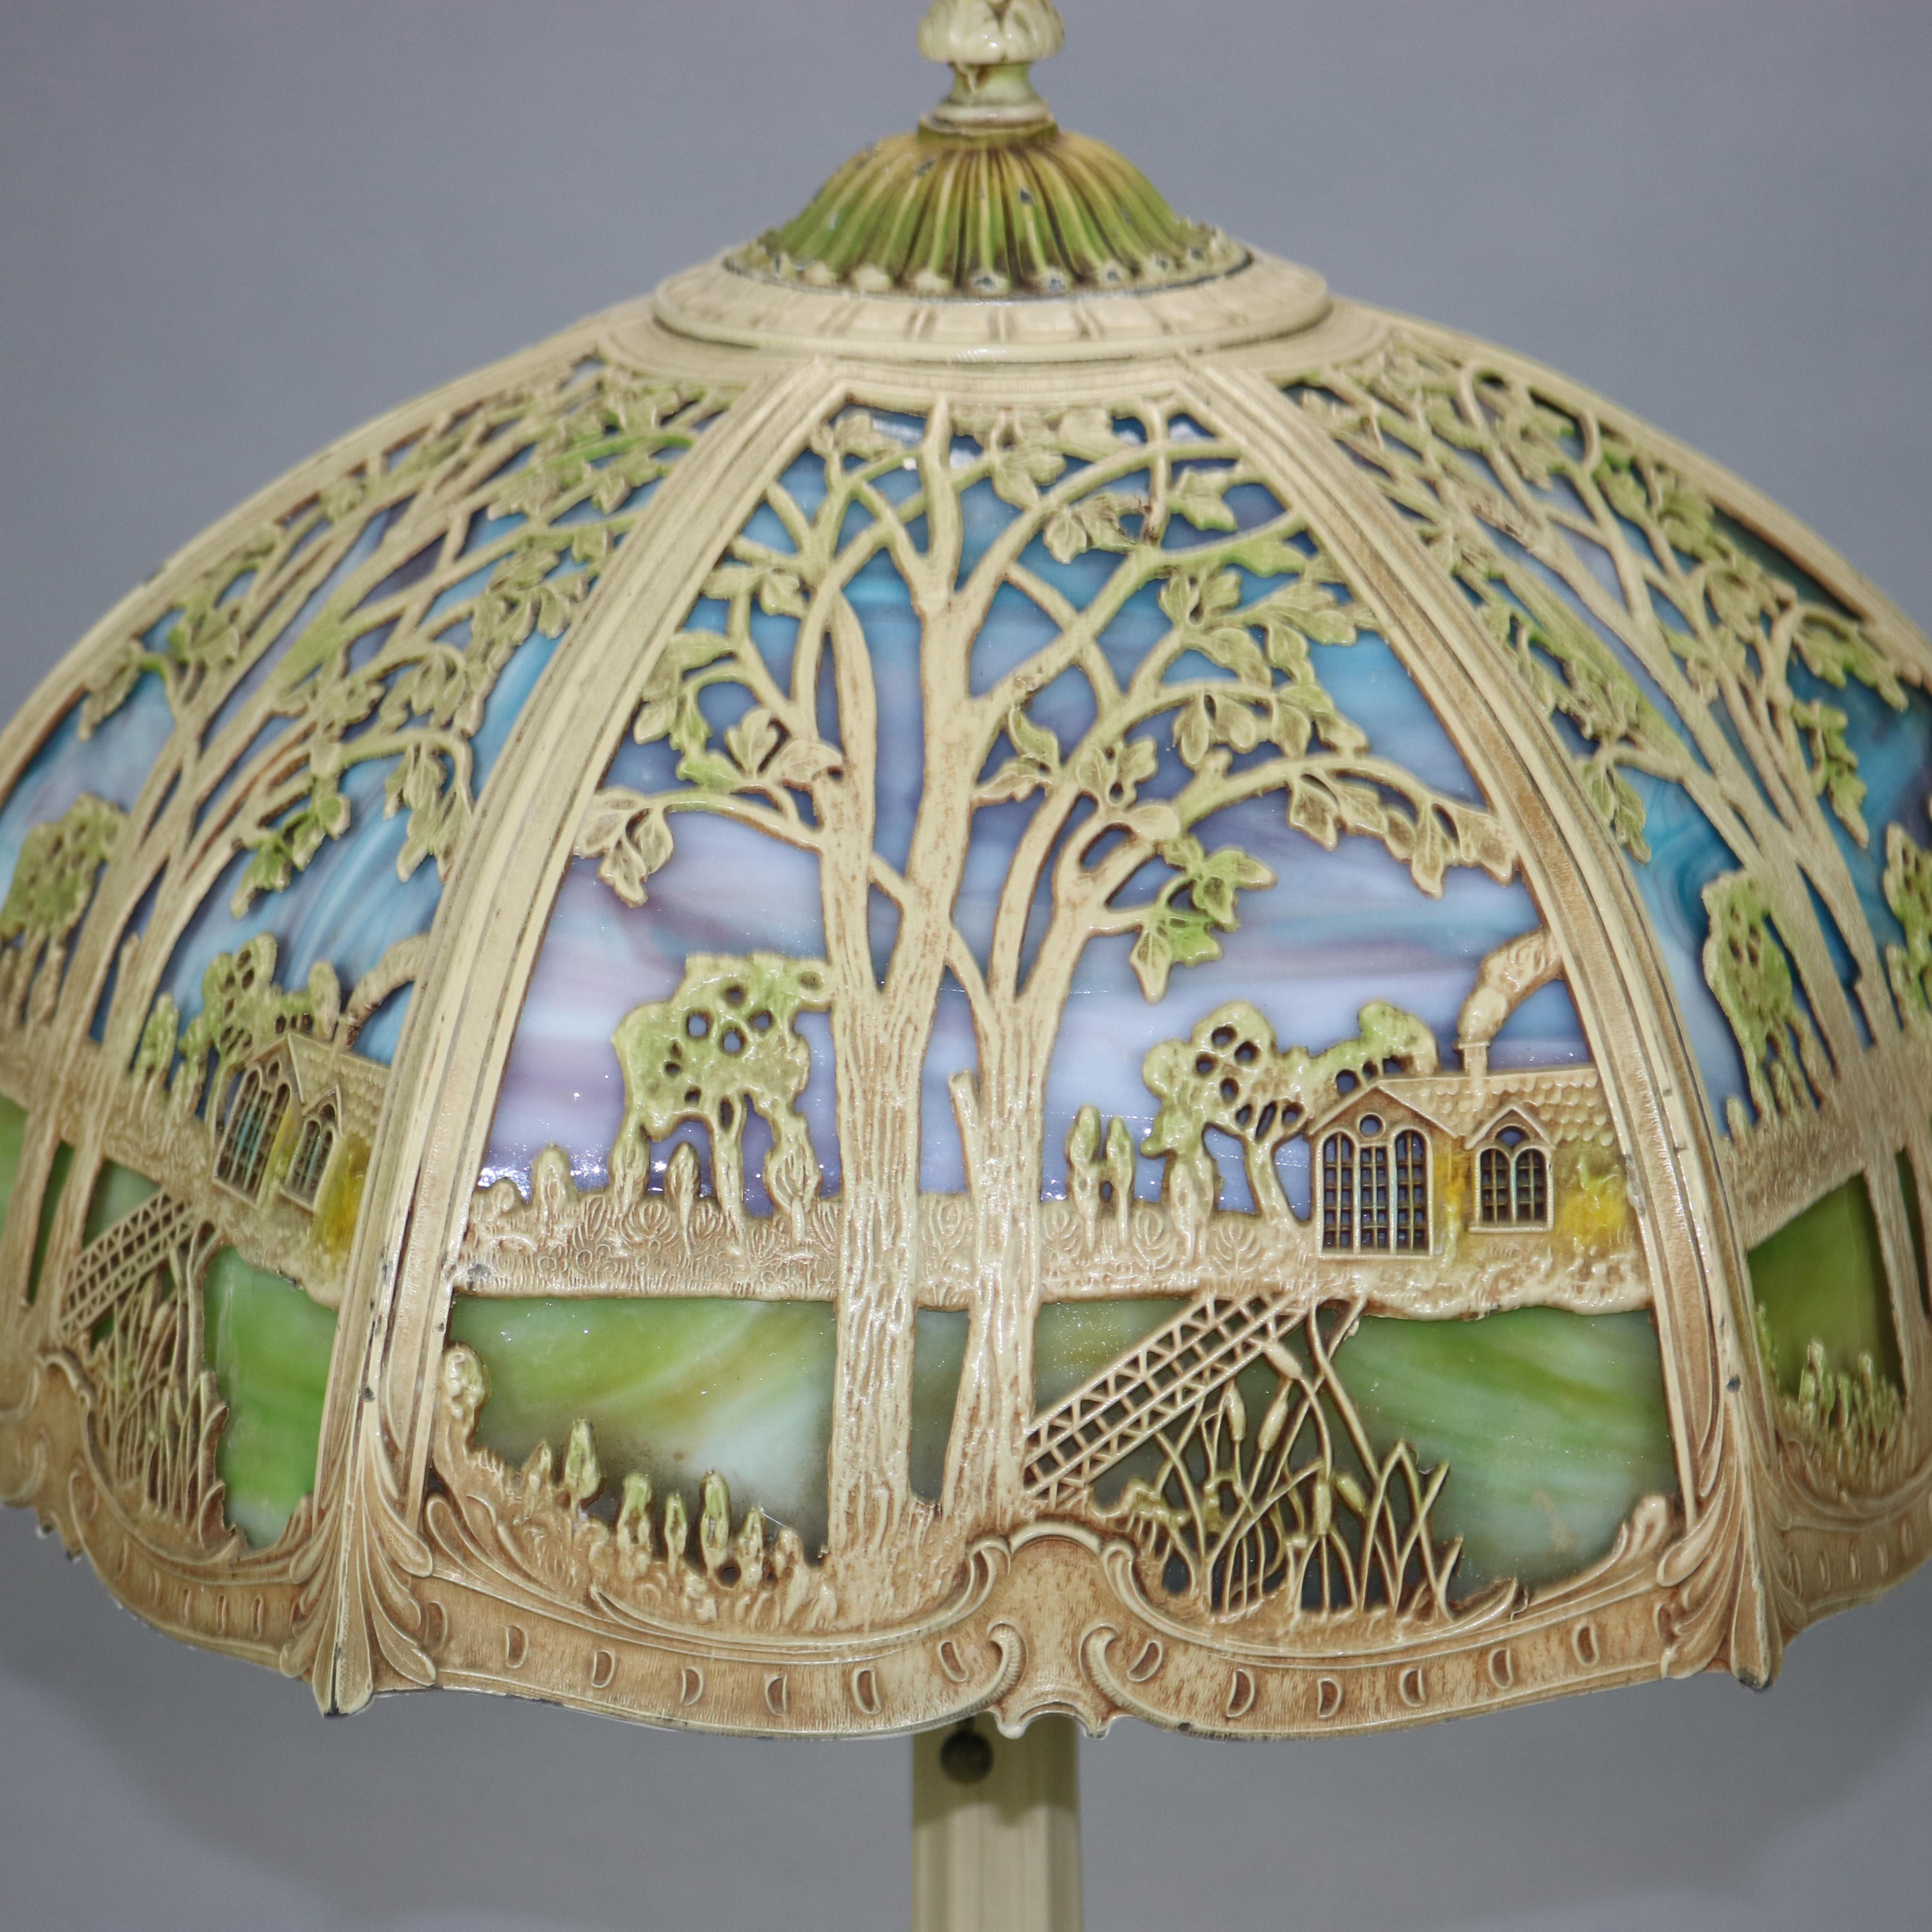 An antique Arts and Crafts table lamp in the manner of Miller offers filigree overlay domed shade with landscape scene and housing polychrome slag glass over double socket base, c1920

Measures: 22